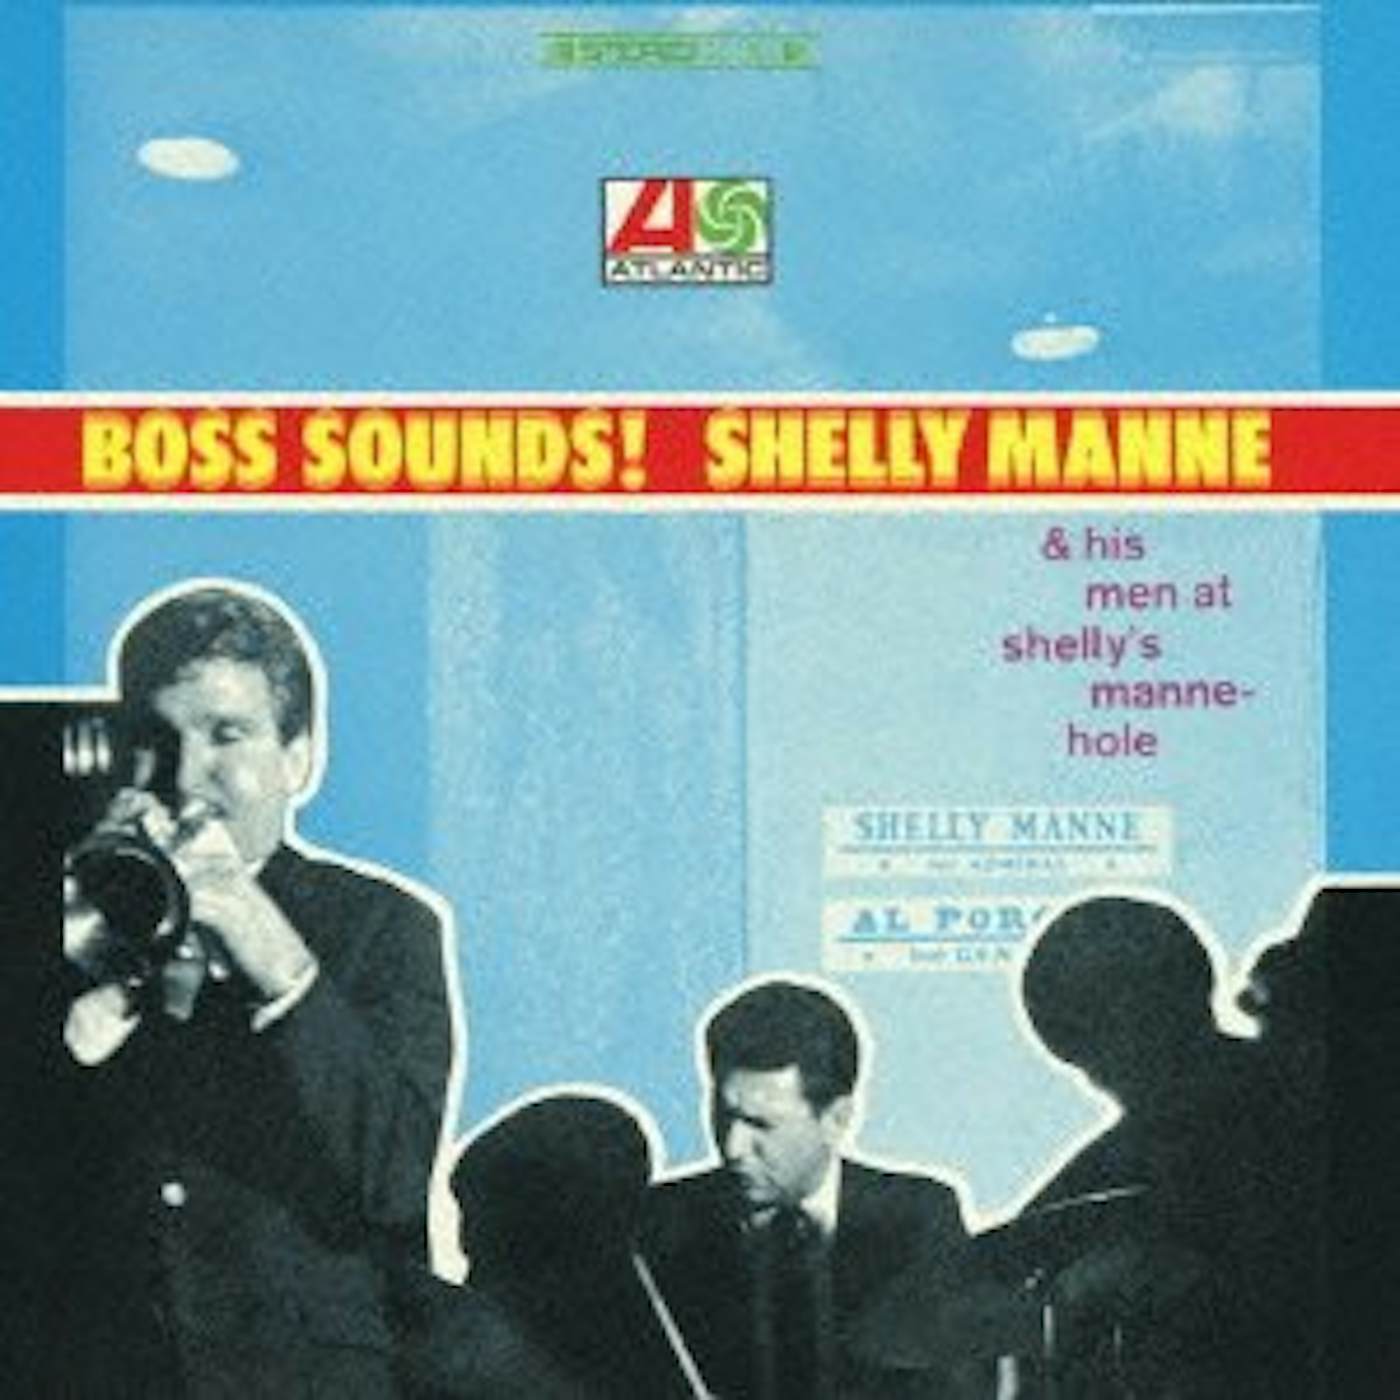 BOSS SOUNDS: SHELLY MANNE & HIS MEN AT SHELLY'S CD